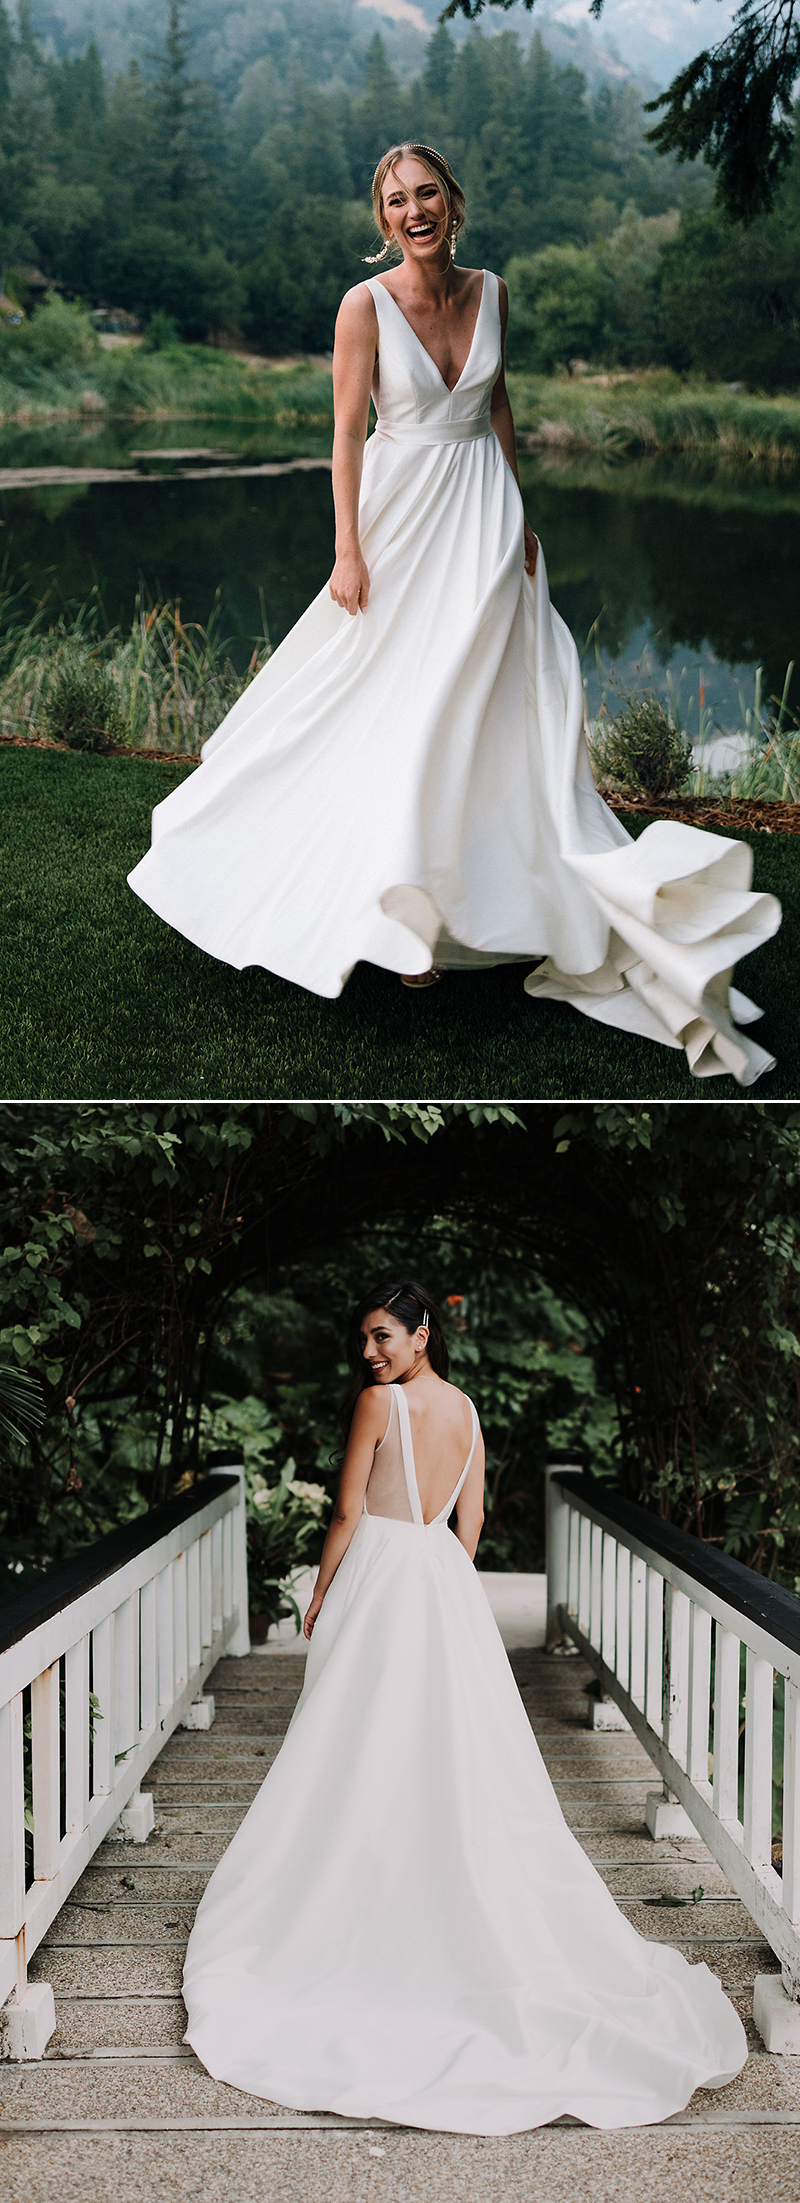 20 Beautiful Wedding Dresses With Pockets To Carry Your Phone and